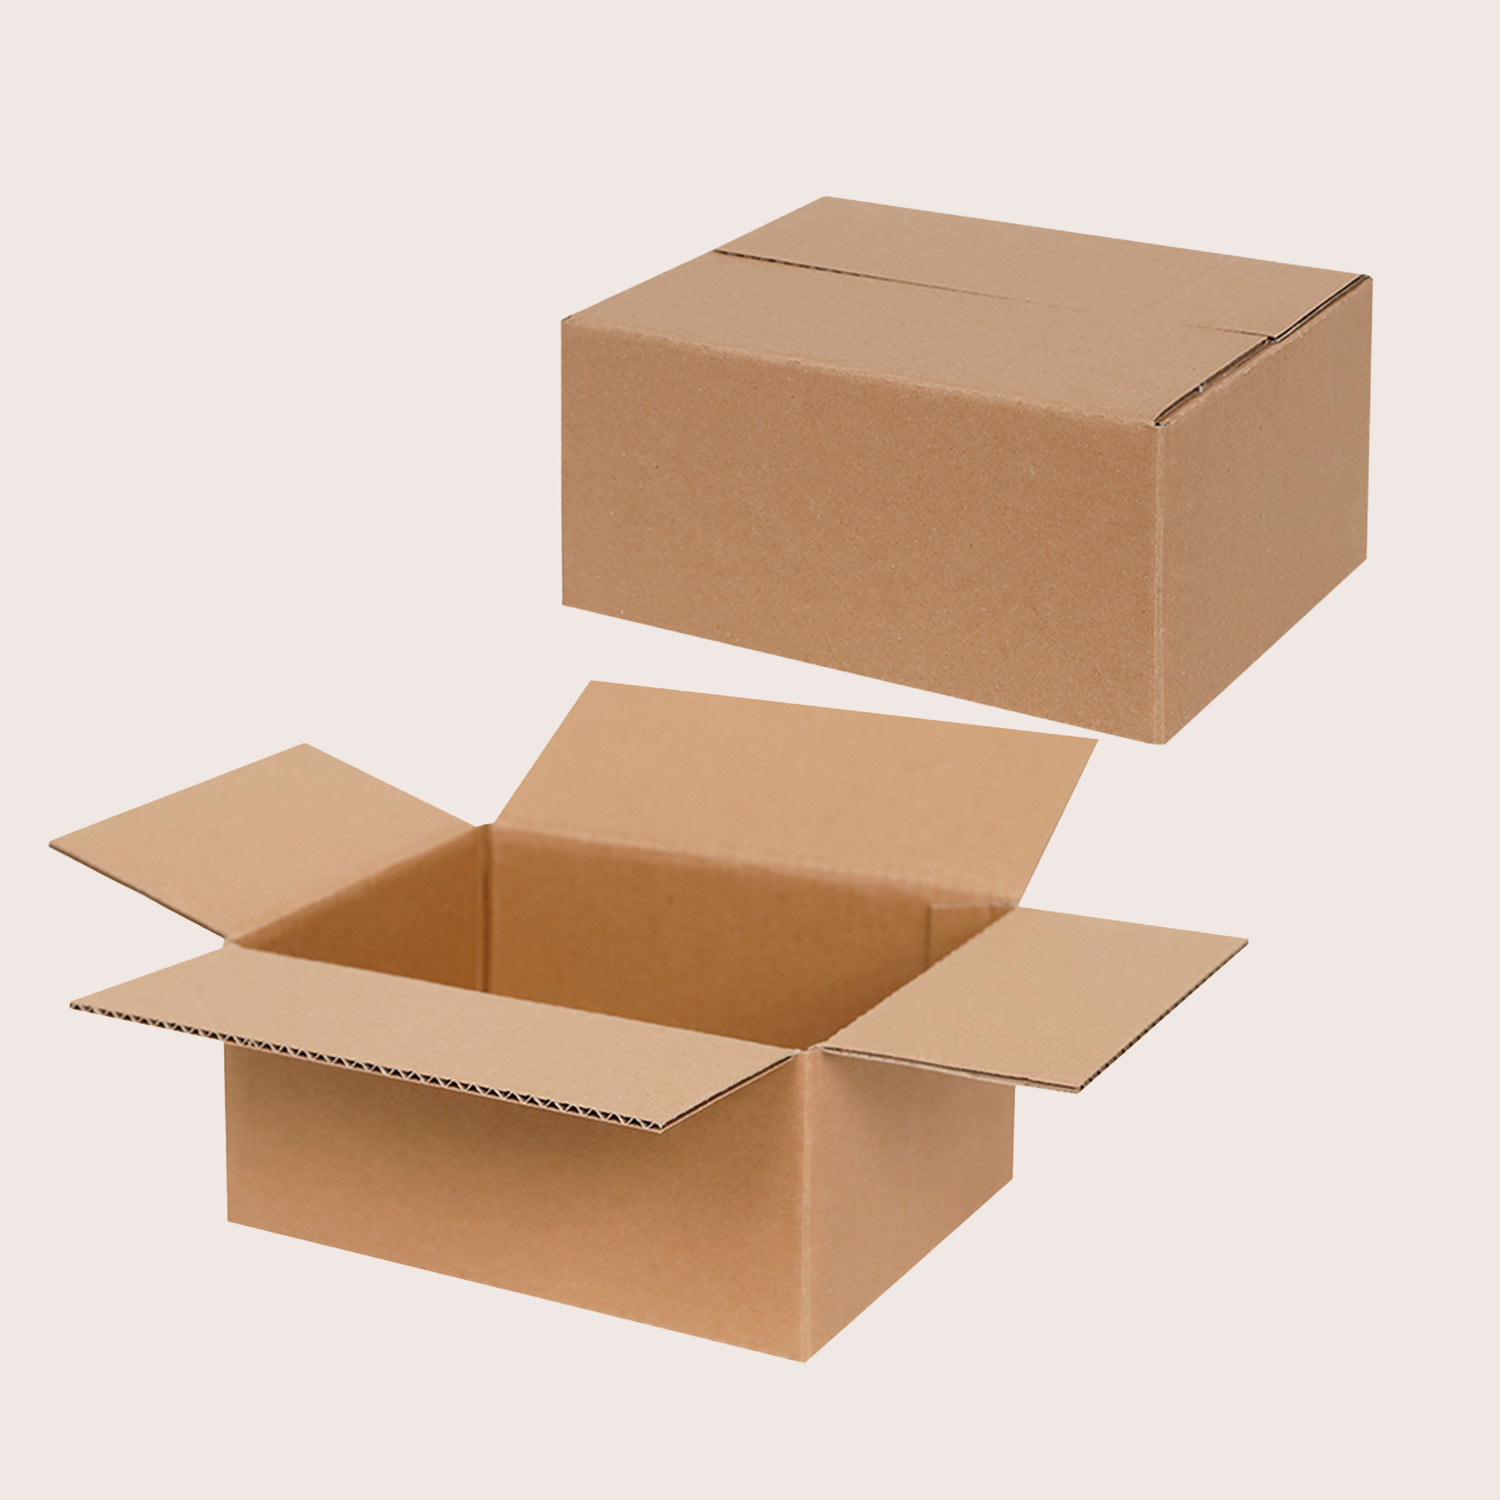 Corrugated cardboard folding boxes in small standard sizes